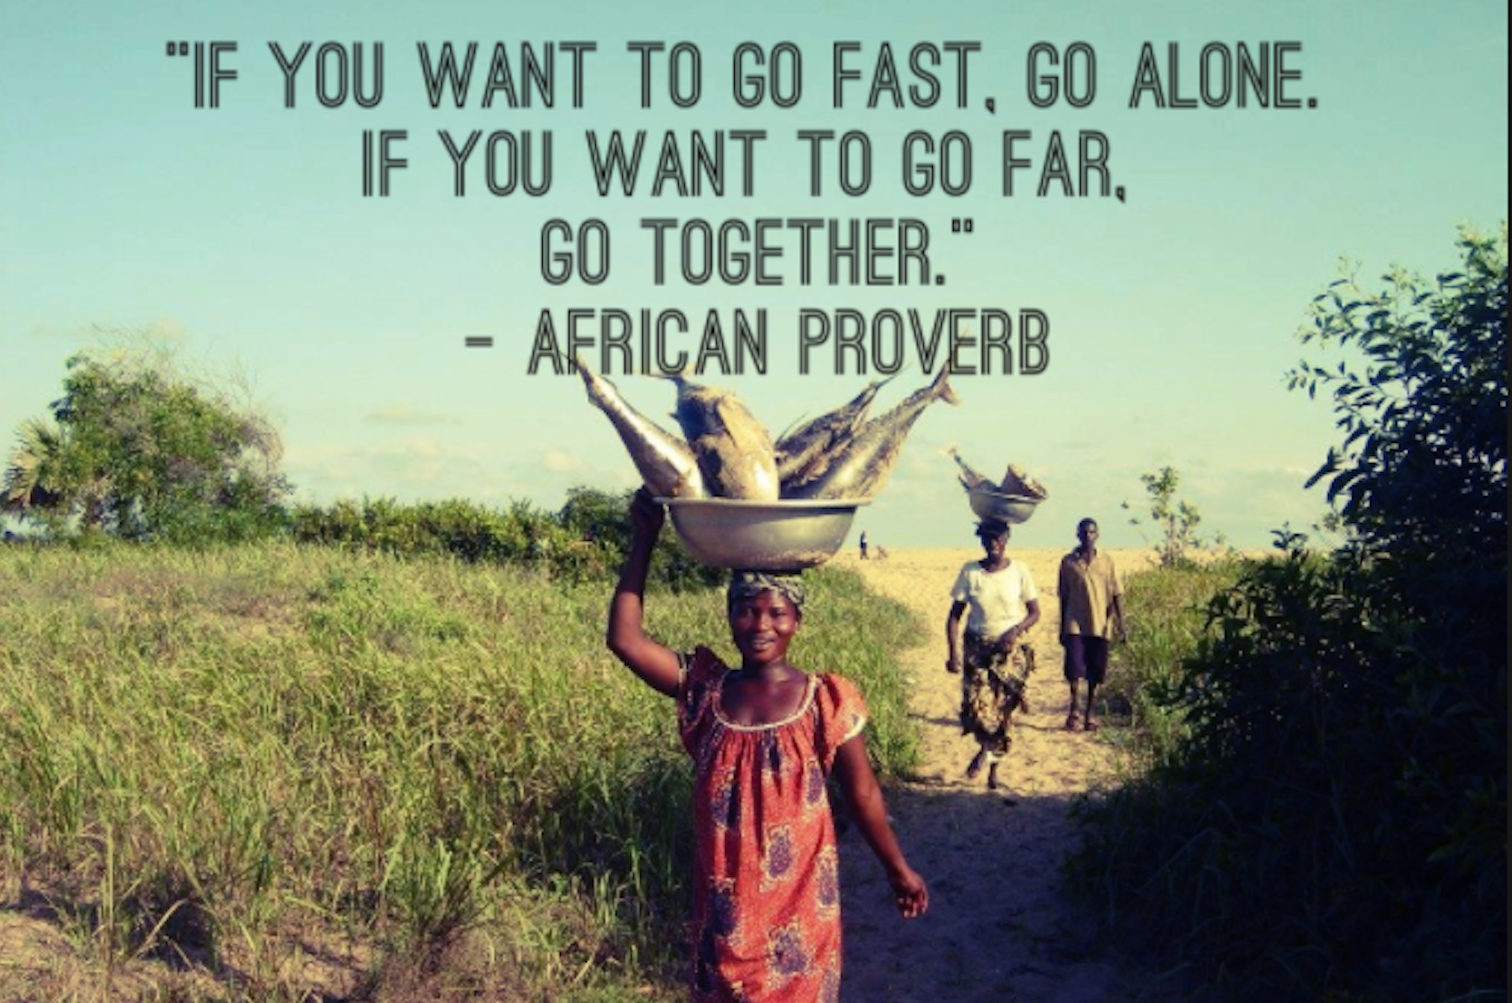 African Proverbs. Go far. If you want to go fast go Alone. Африканские пословицы. See far go further